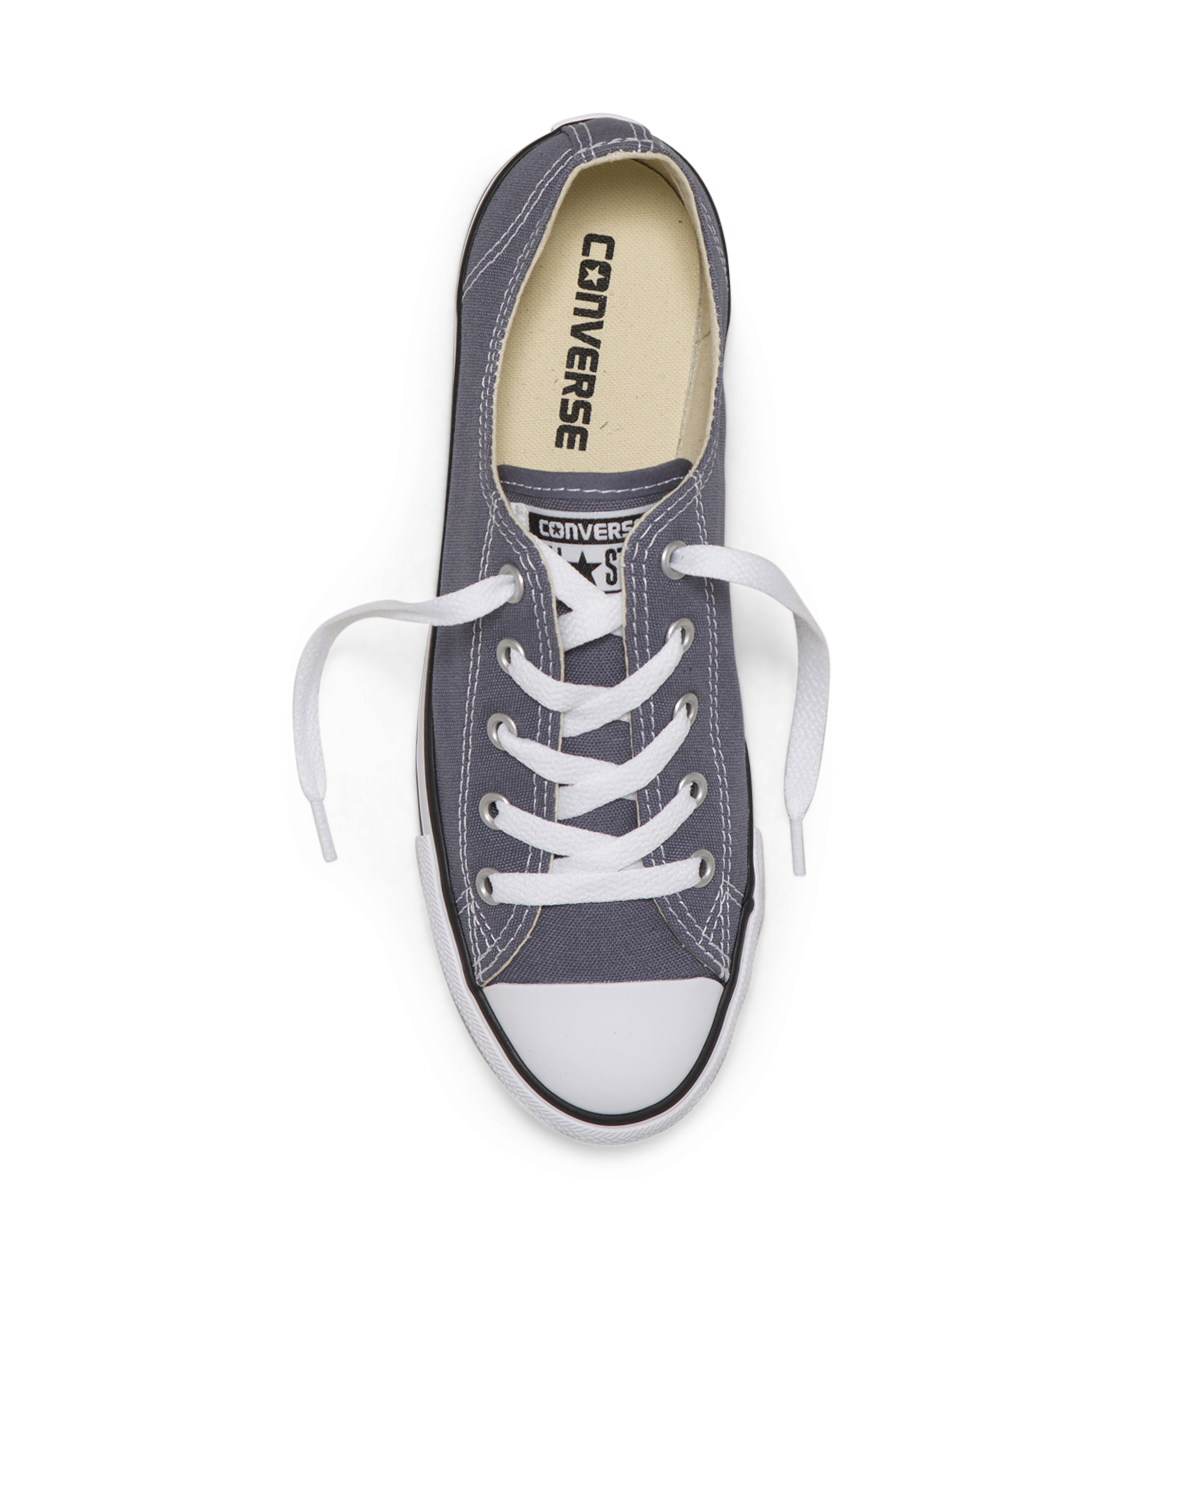 Converse clipart one shoe. Chuck taylor dainty canvas